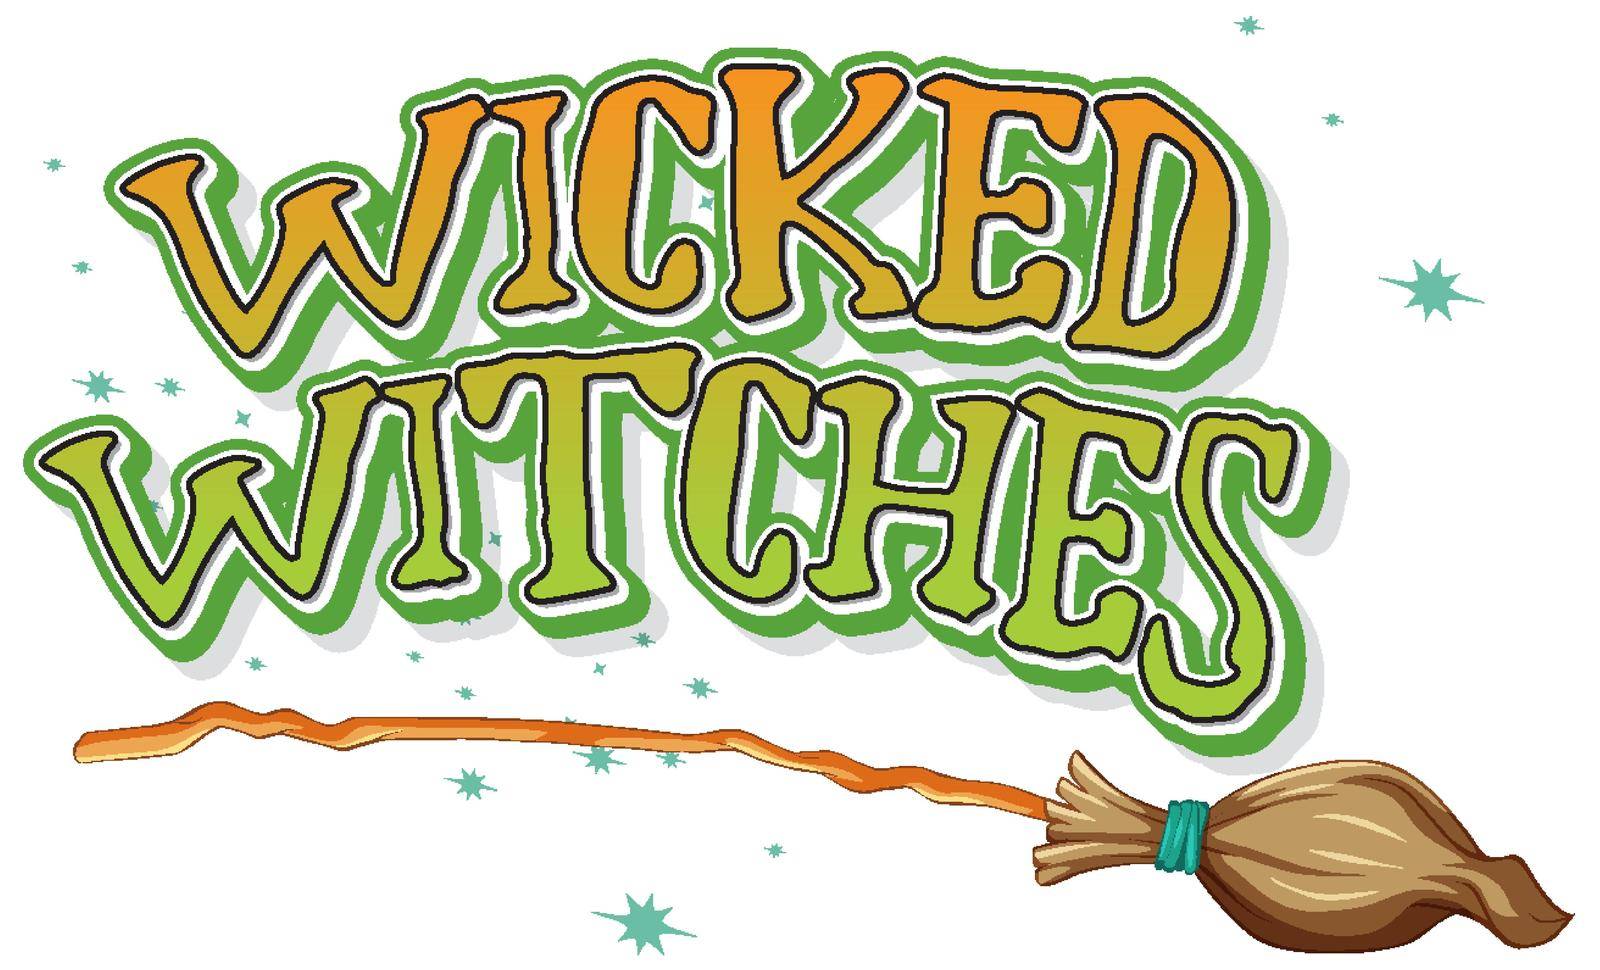 Wicked witches logo on white background illustration